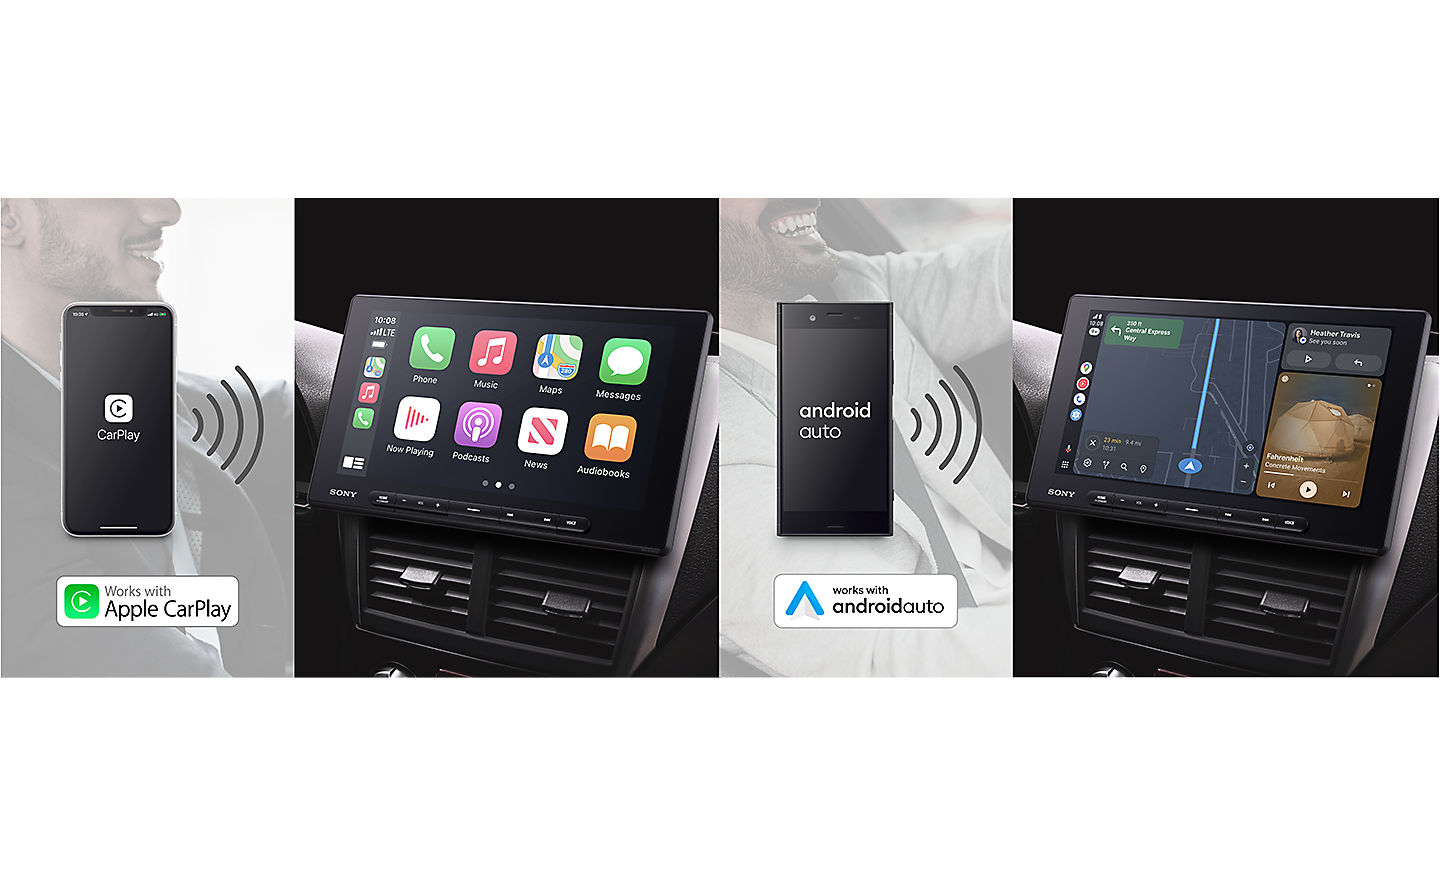 Images of the XAV-AX8500 connected via Wi-Fi to both Apple CarPlay and  Android Auto